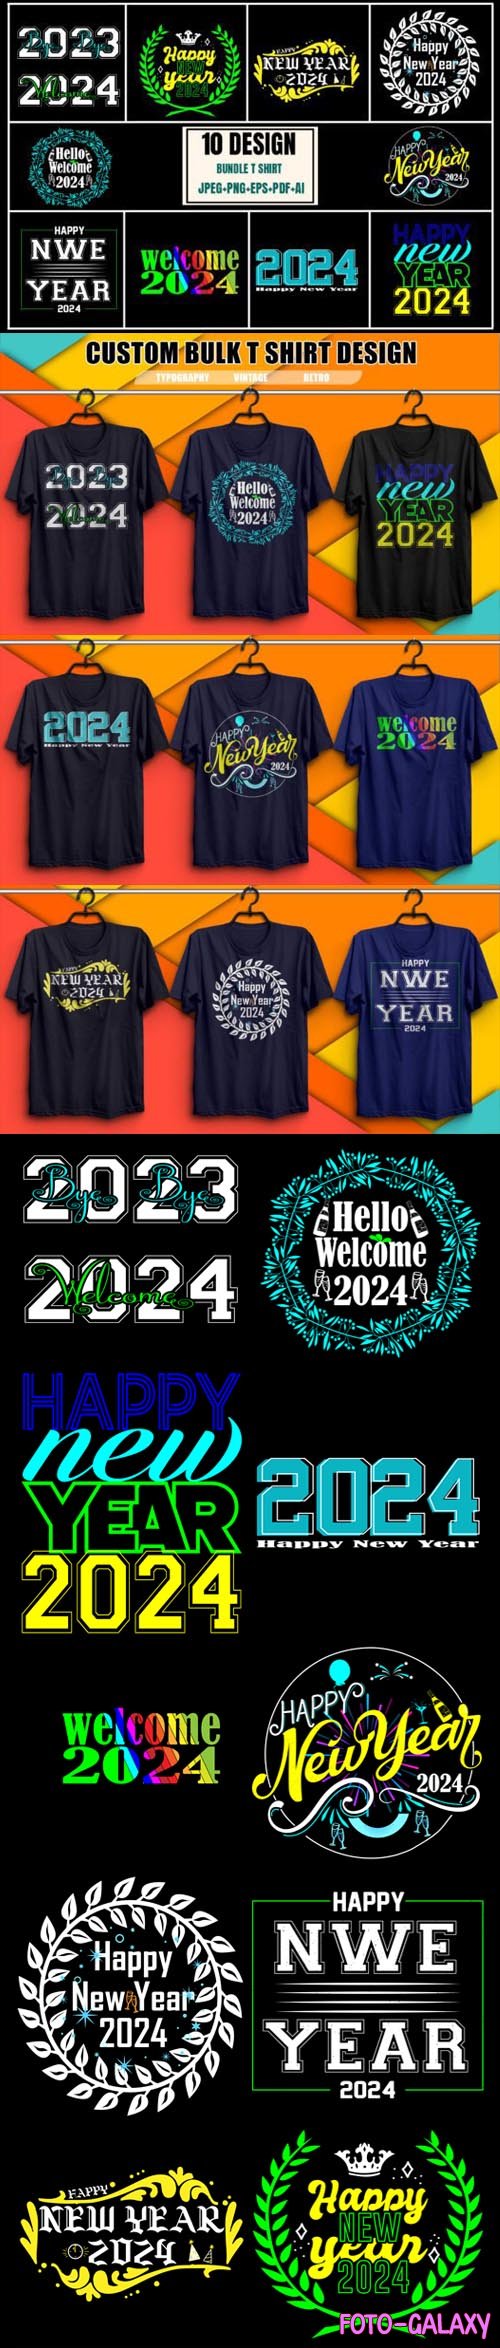 Happy New Year 2024 - 10 T-shirts Vector Design Templates